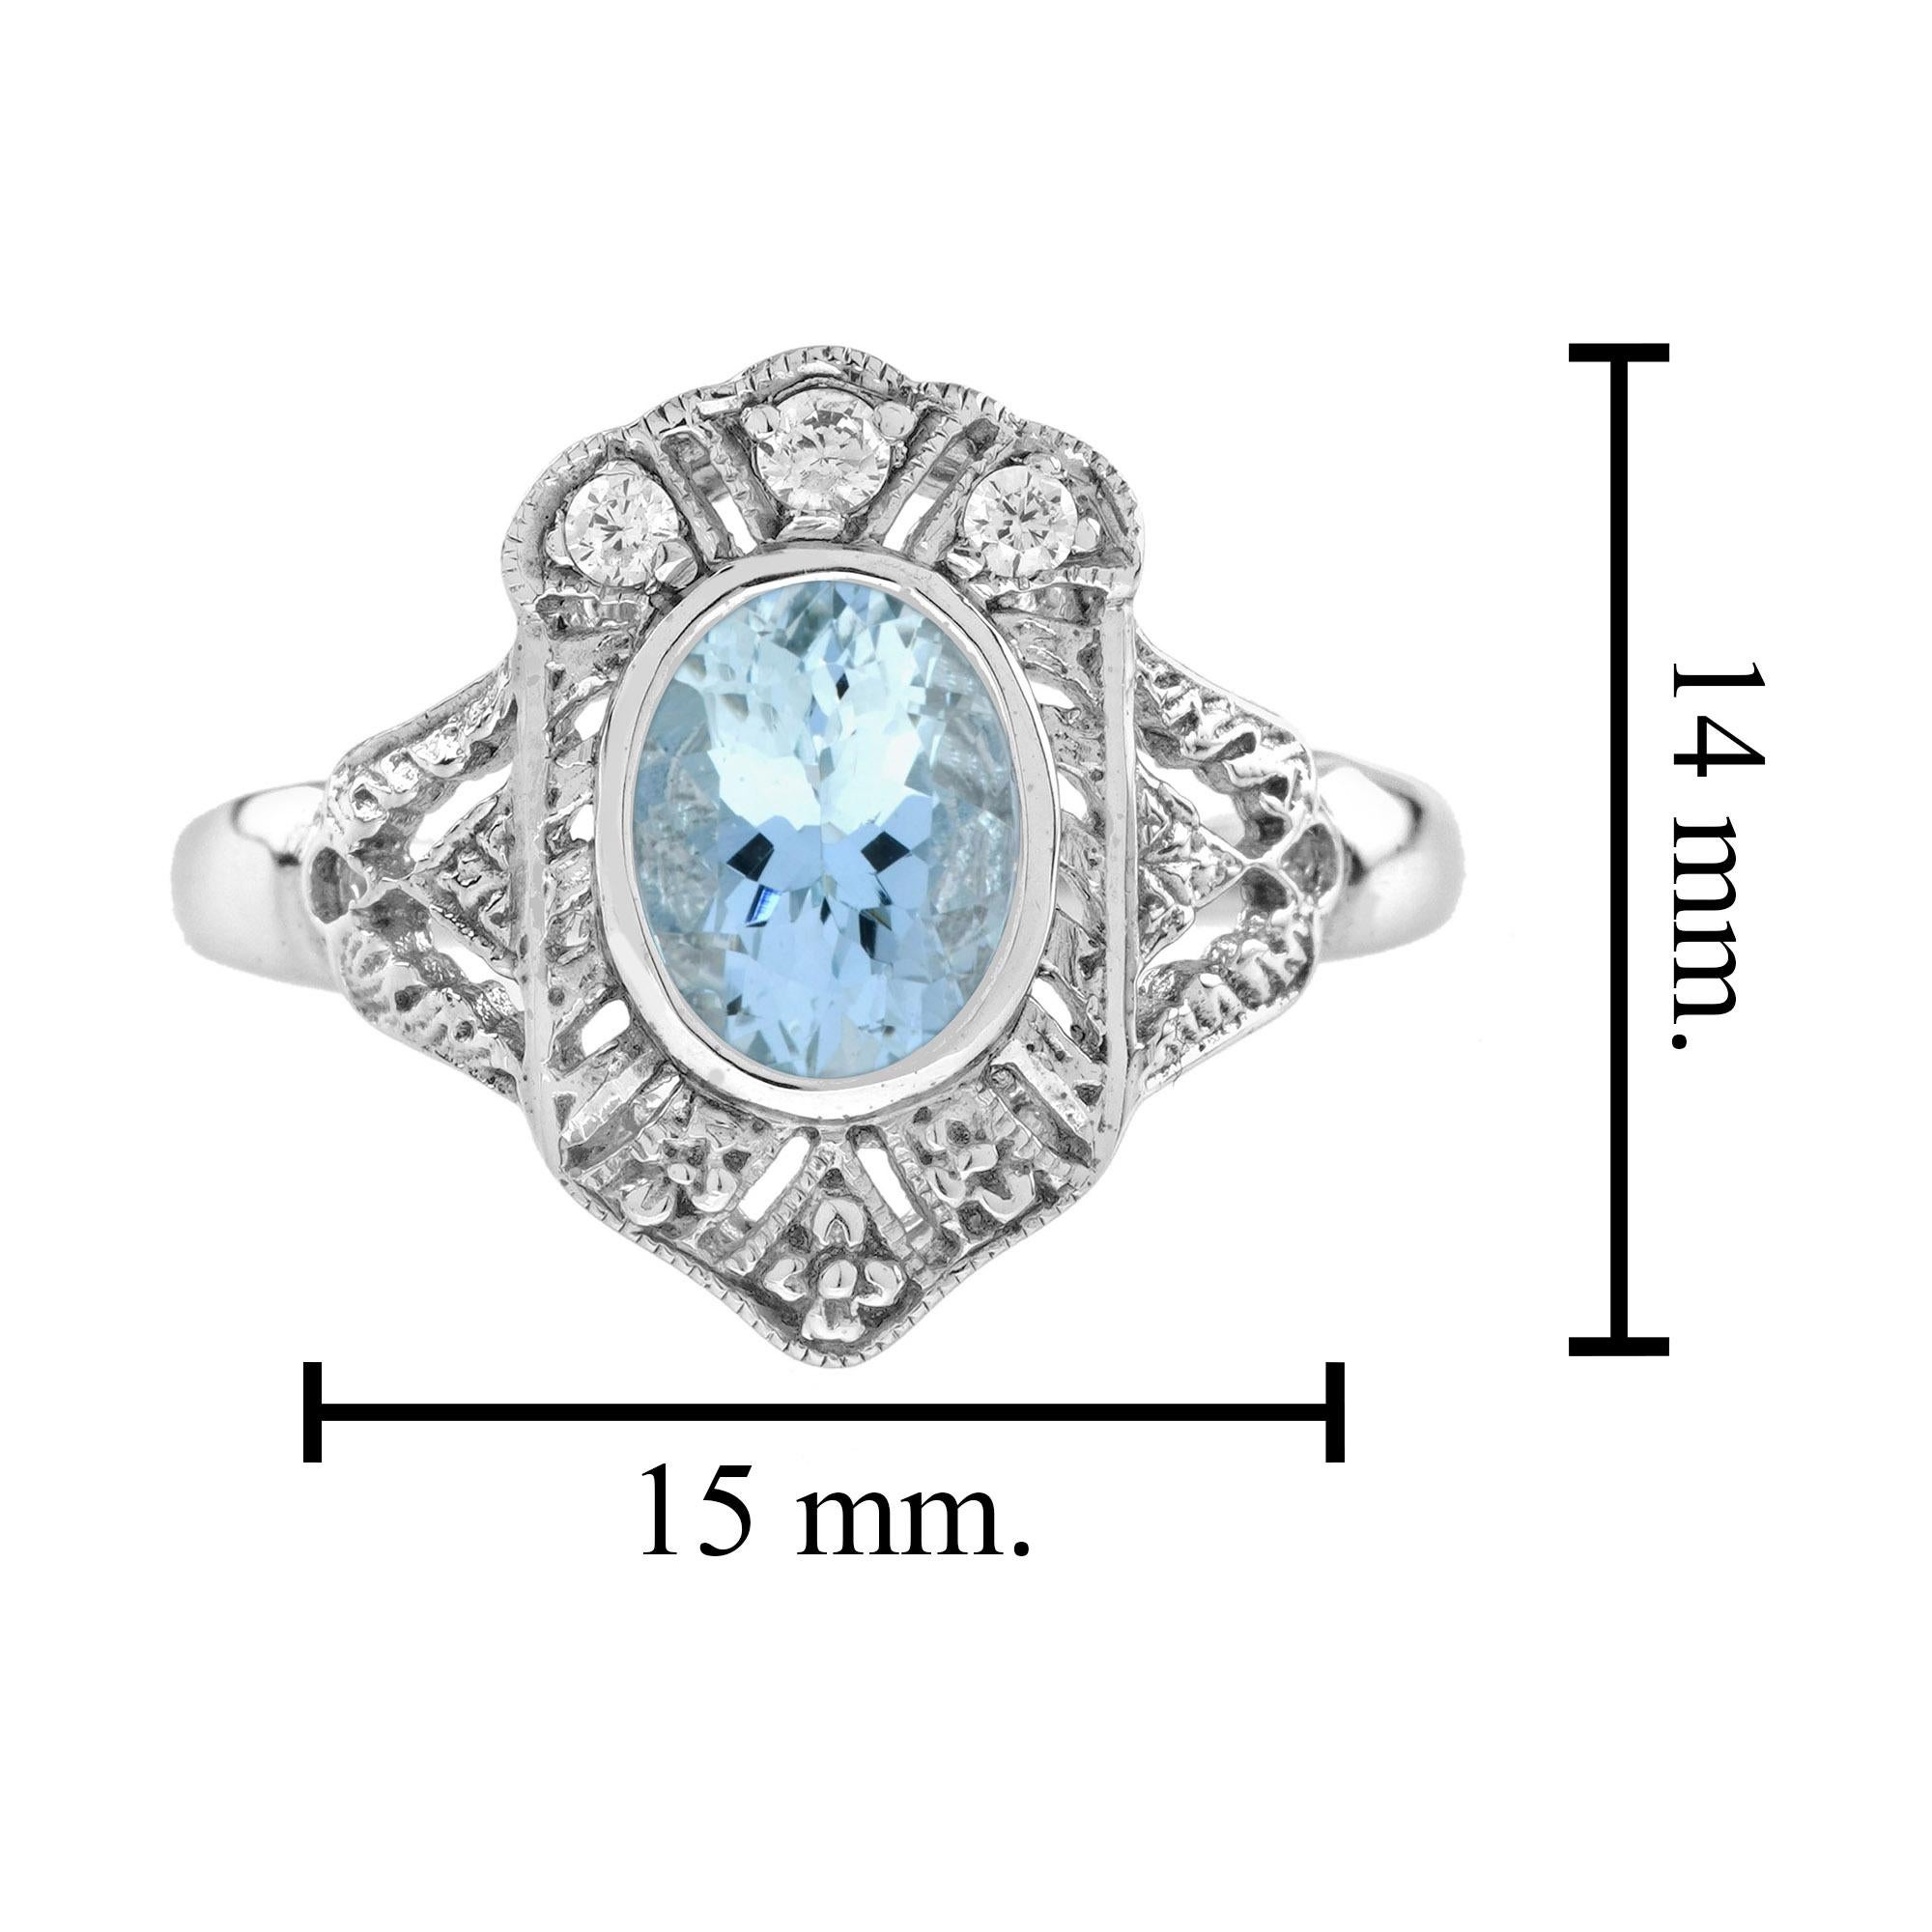 1.5 Ct. Aquamarine and Diamond Art Deco Style Engagement Ring in 14K White Gold For Sale 2